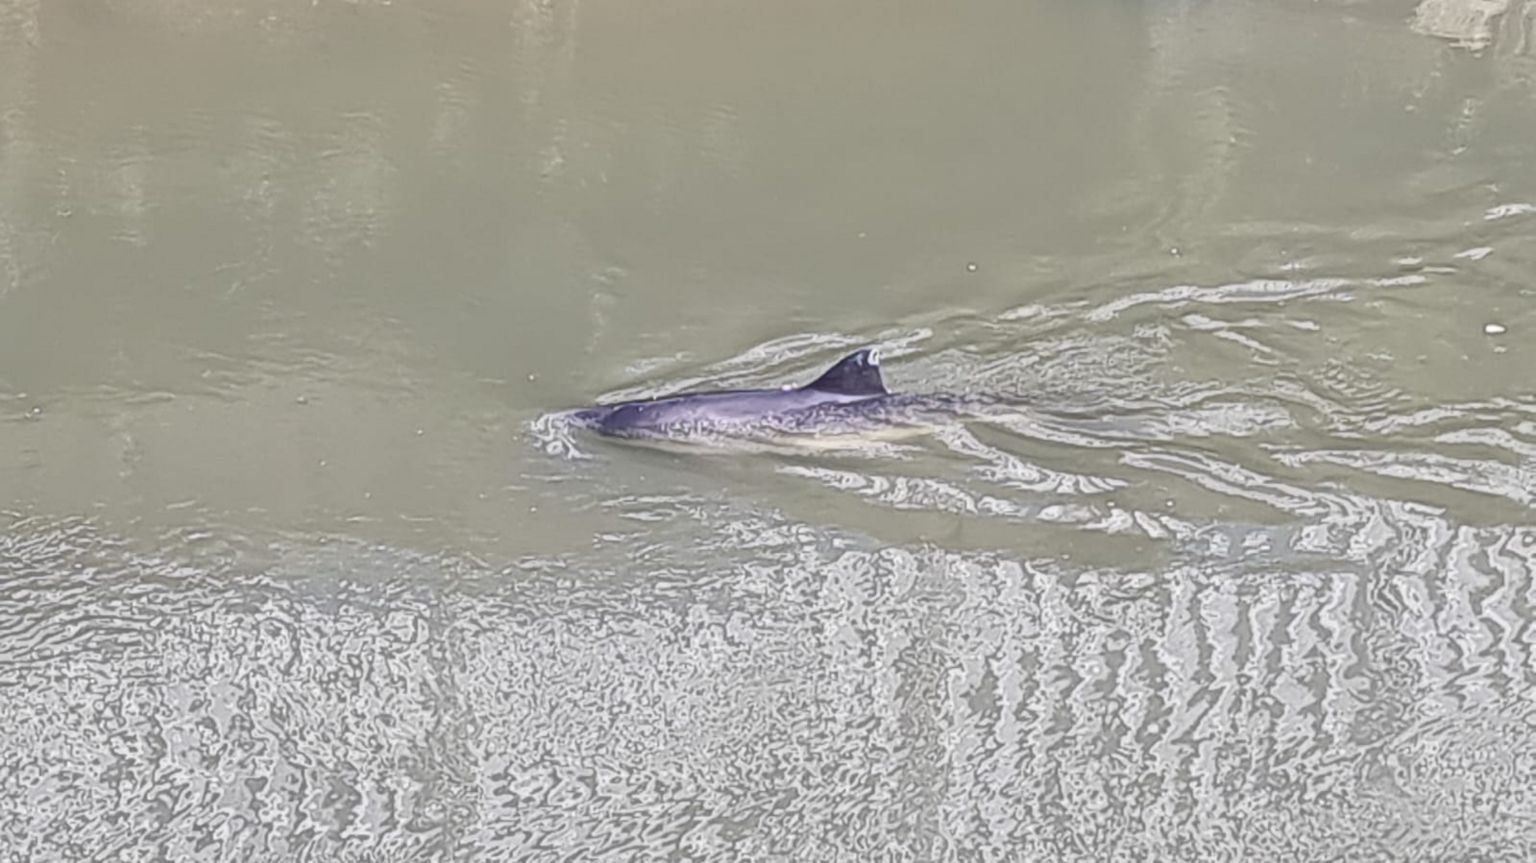 A porpoise in the river